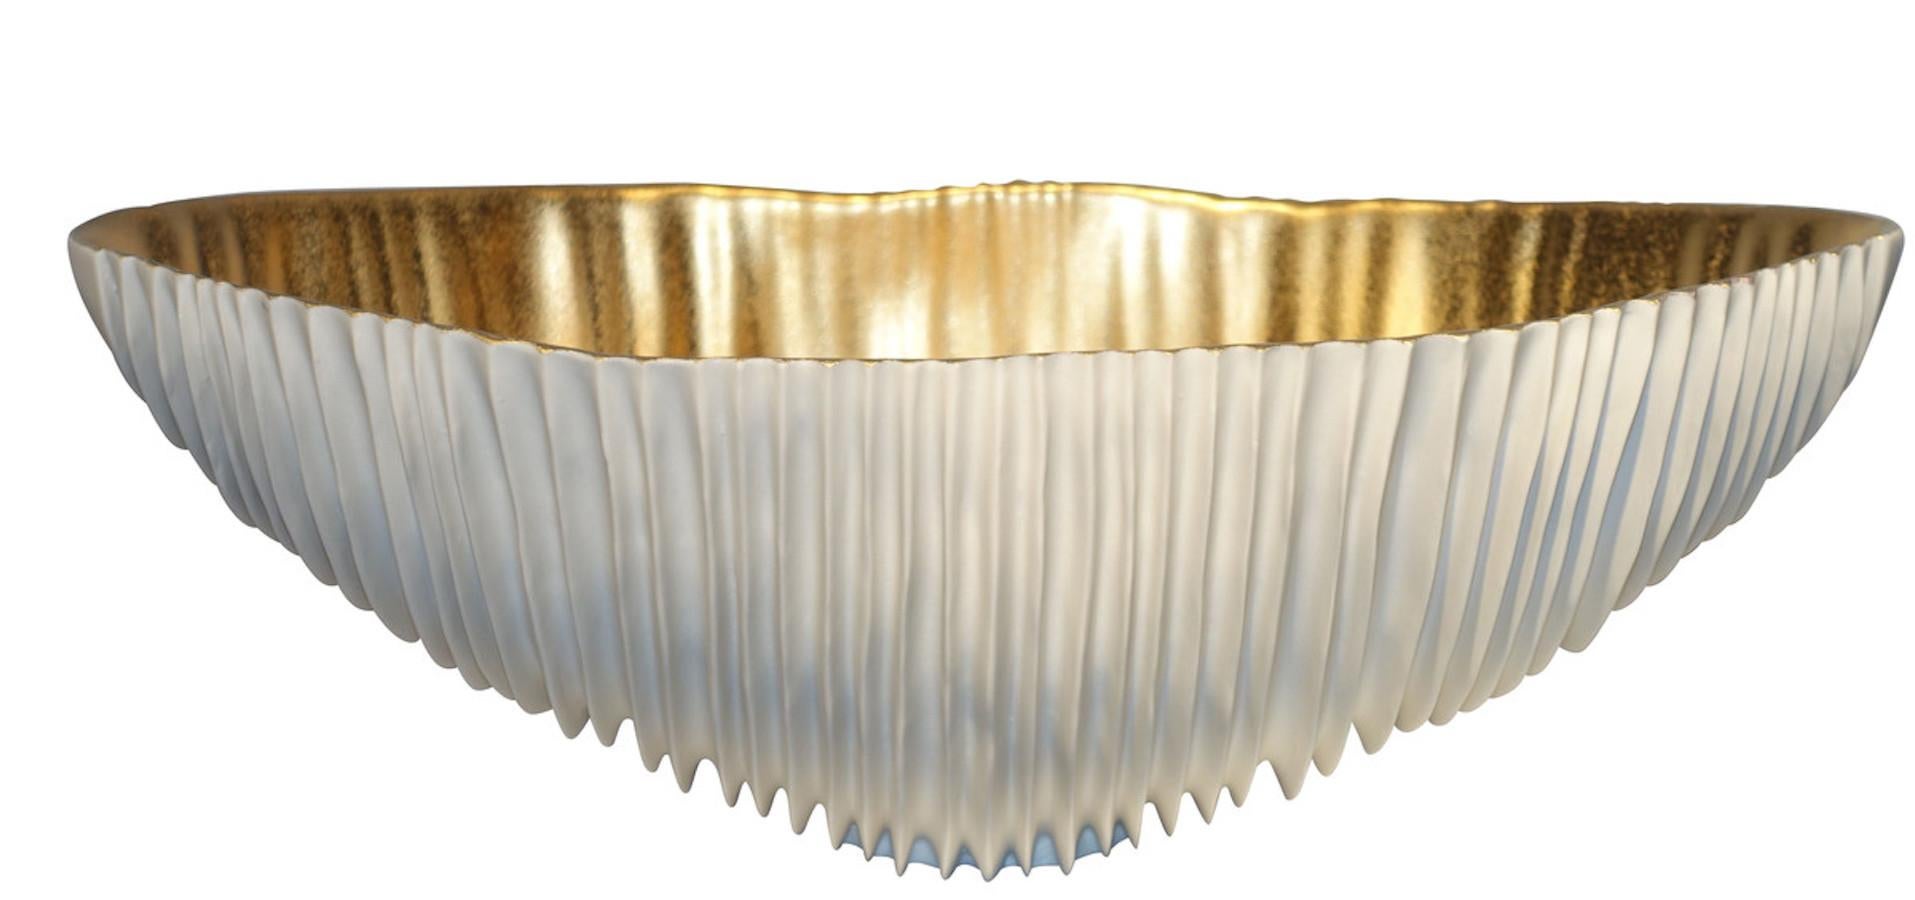 White Porcelain Bowl with Gold Leaf Inside, Italy, Contemporary 1